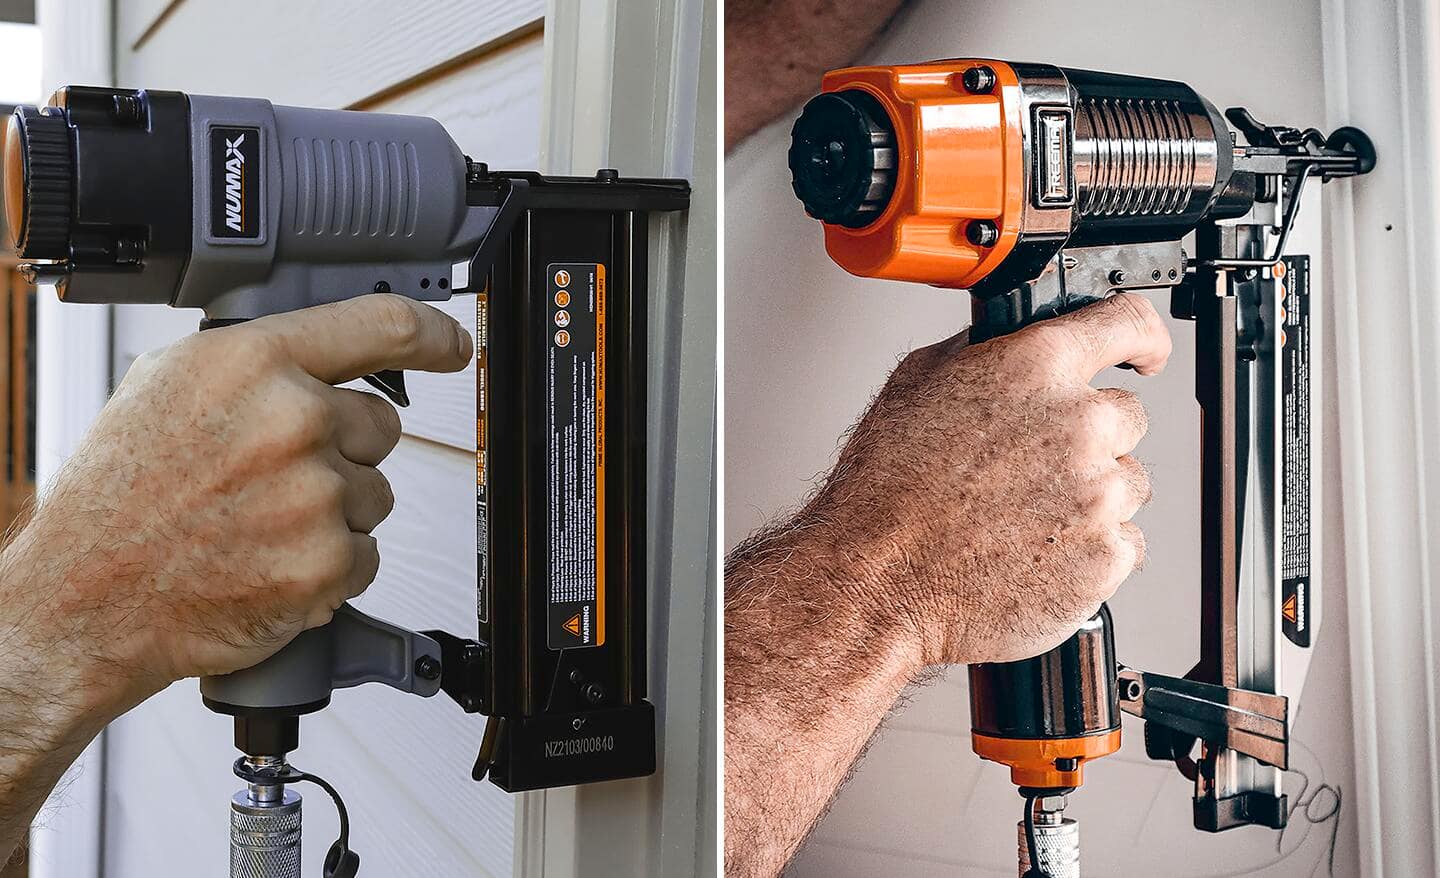 An image of two nailers. The left is a pneumatic brad nailer, and the right is a pneumatic finish nailer.